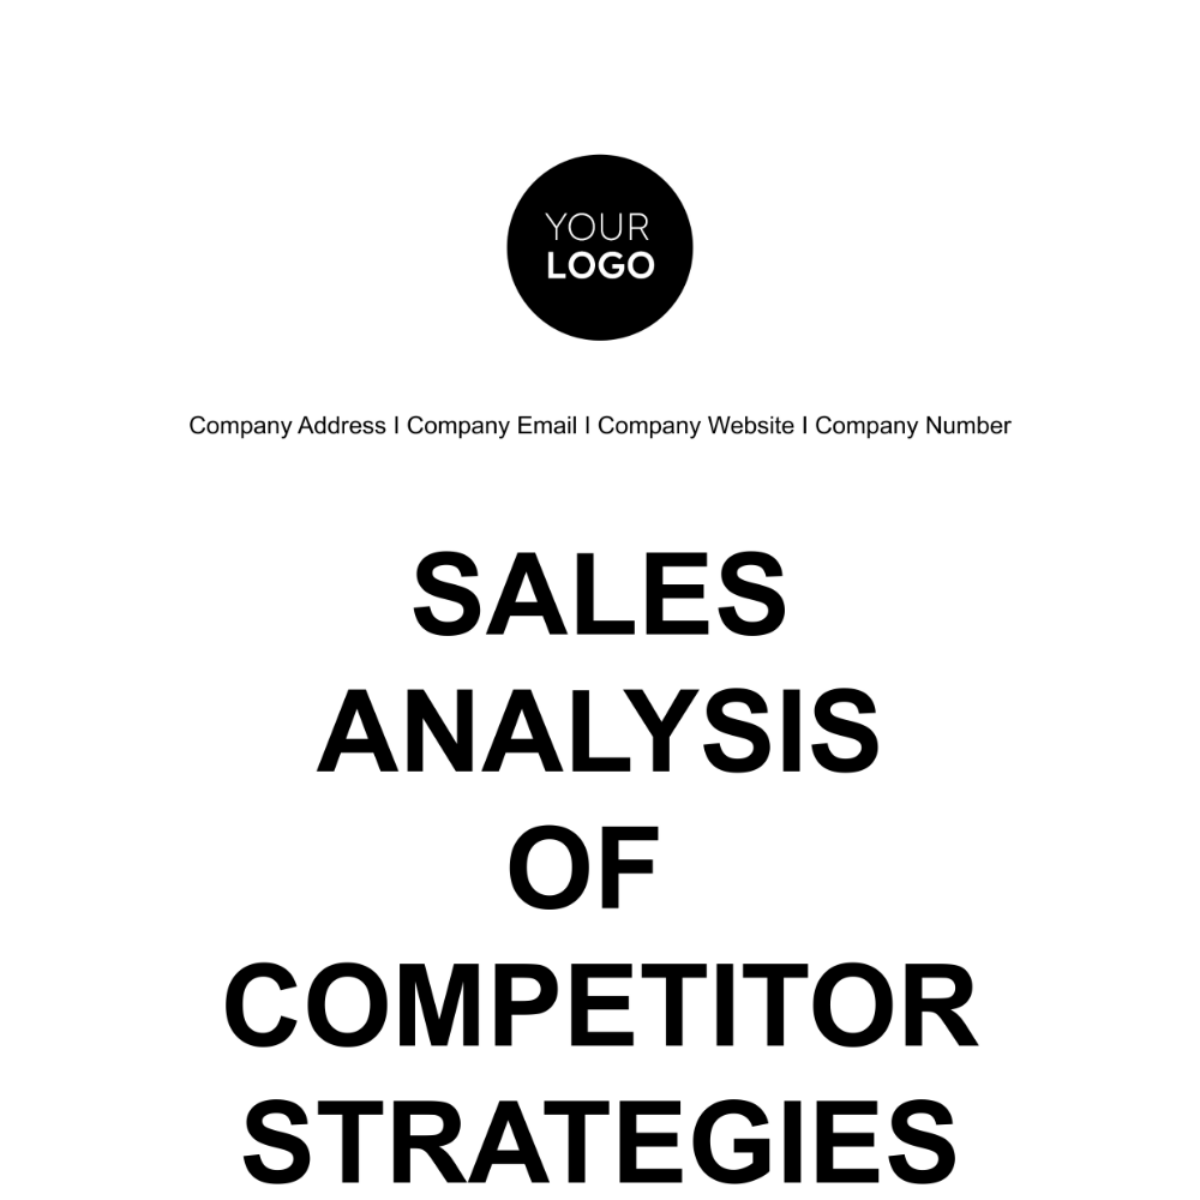 Free Sales Analysis of Competitor Strategies Template